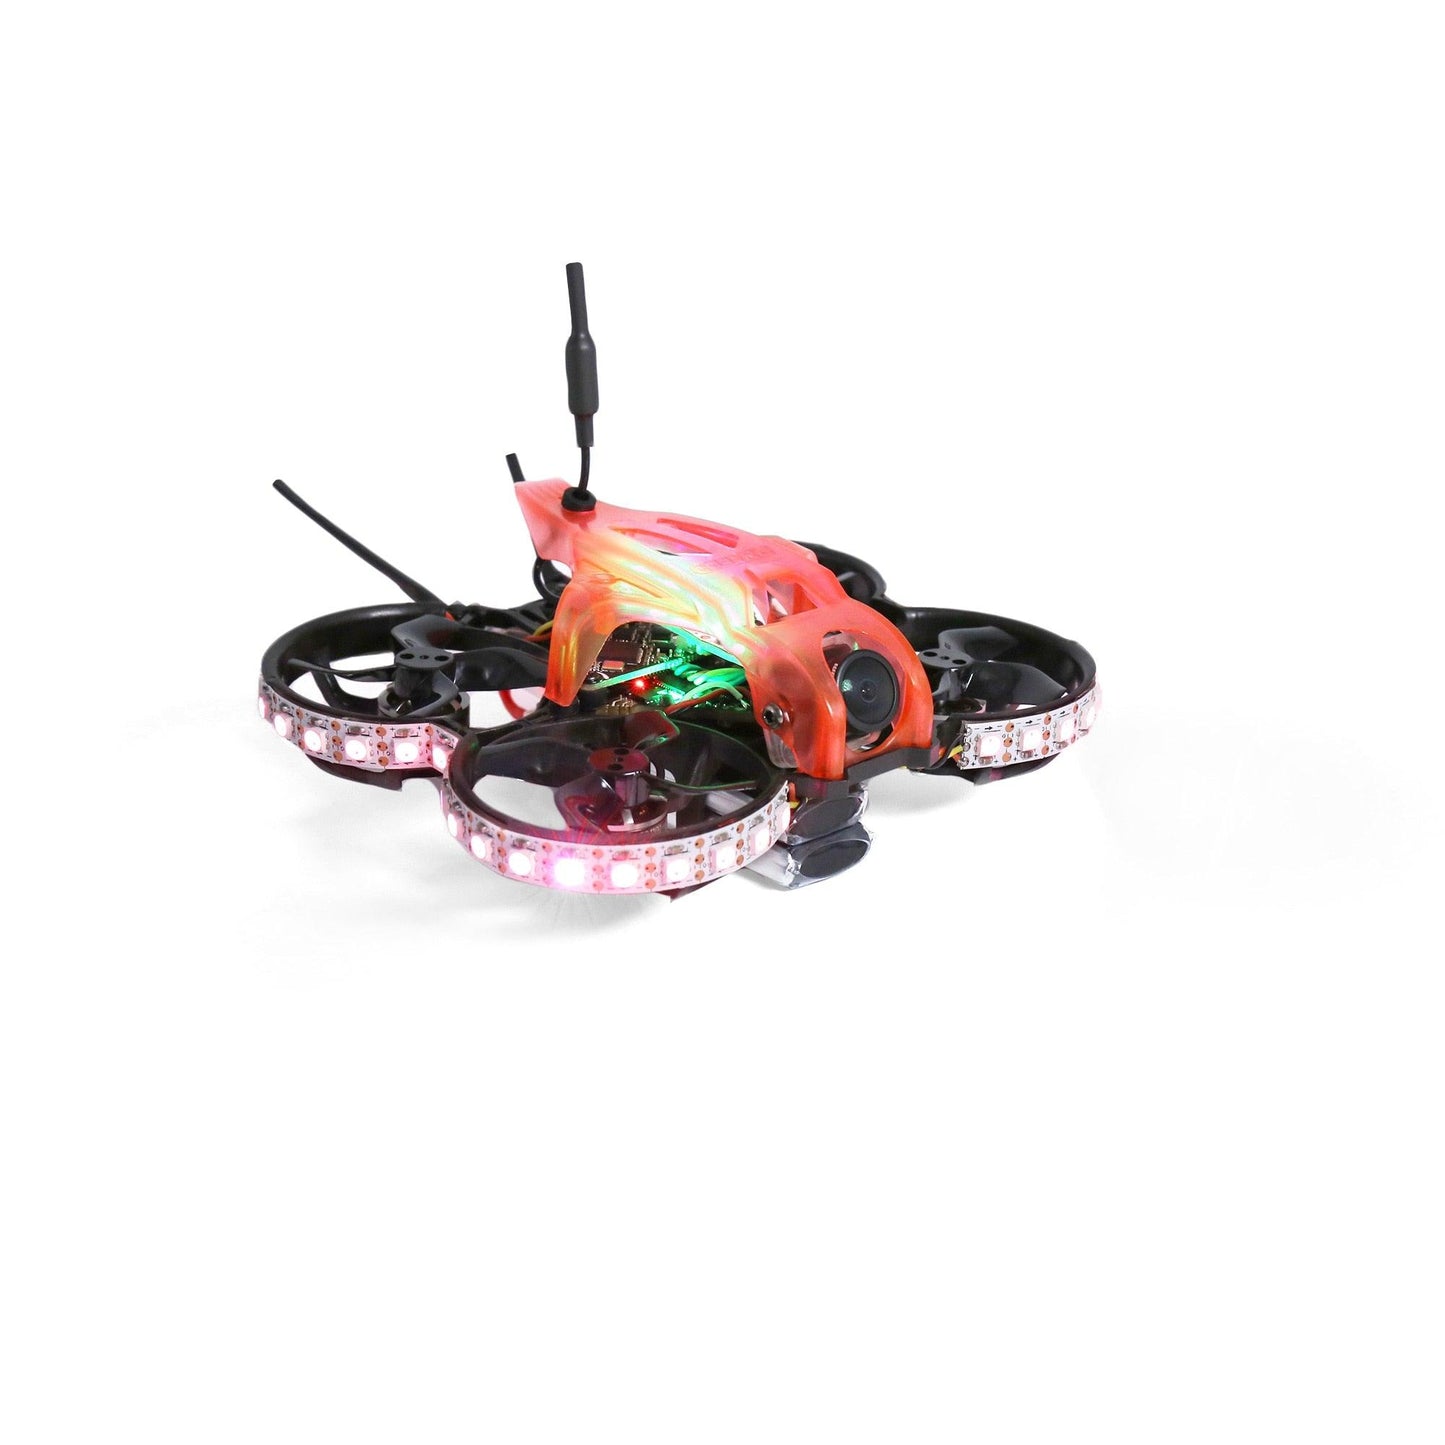 GEPRC TinyGO LED Whoop RTF FPV Drone - Carbon Fiber Frame For RC FPV Quadcopter Freestyle Ducted Drone Very Suitable For Beginners - RCDrone